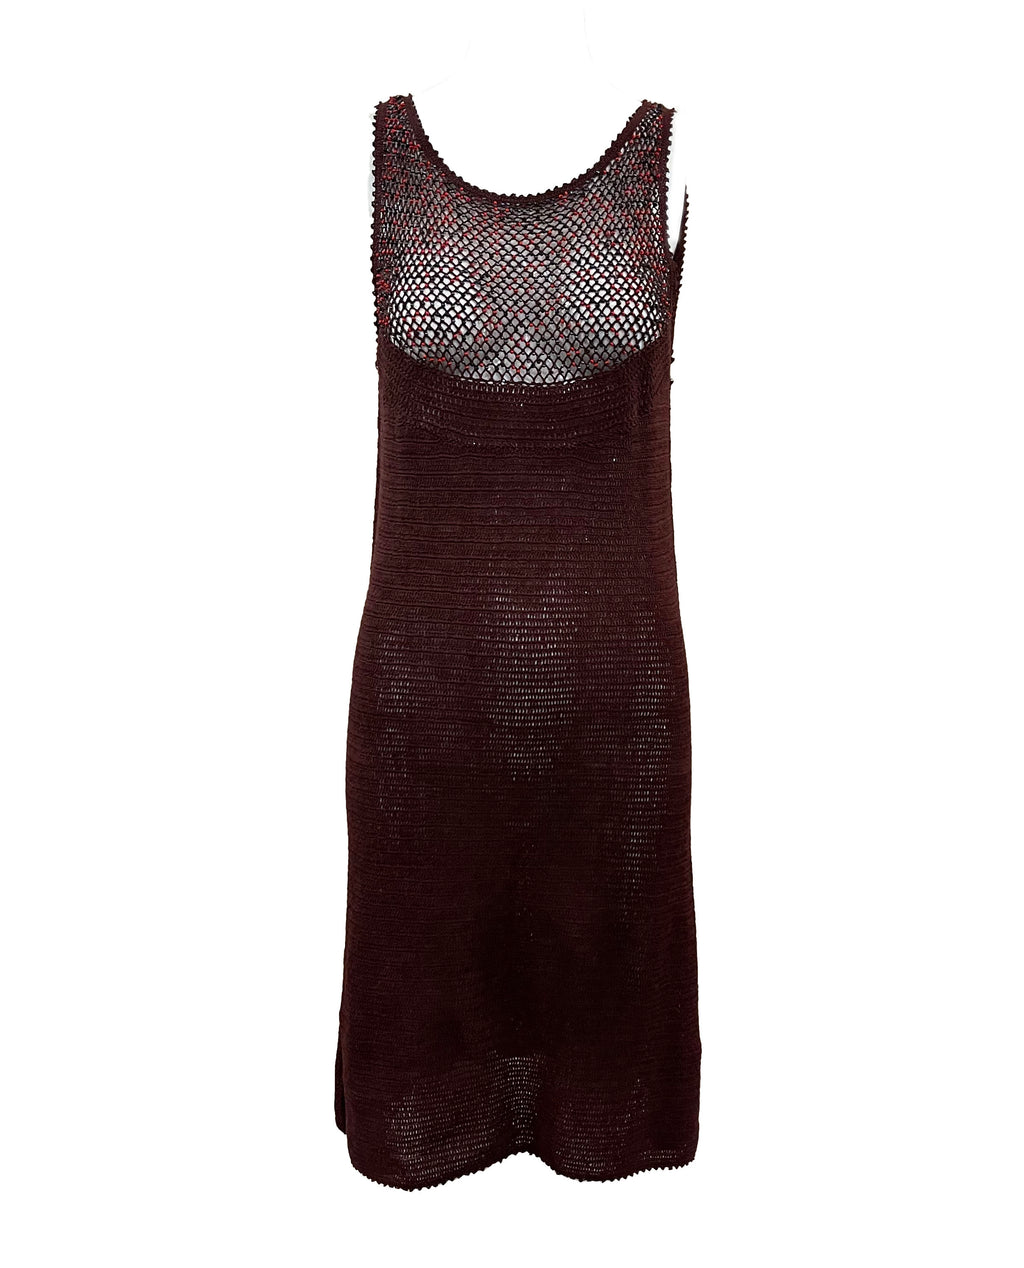 Moschino Y2K Brown Crochet Dress FRONT 1 of 5